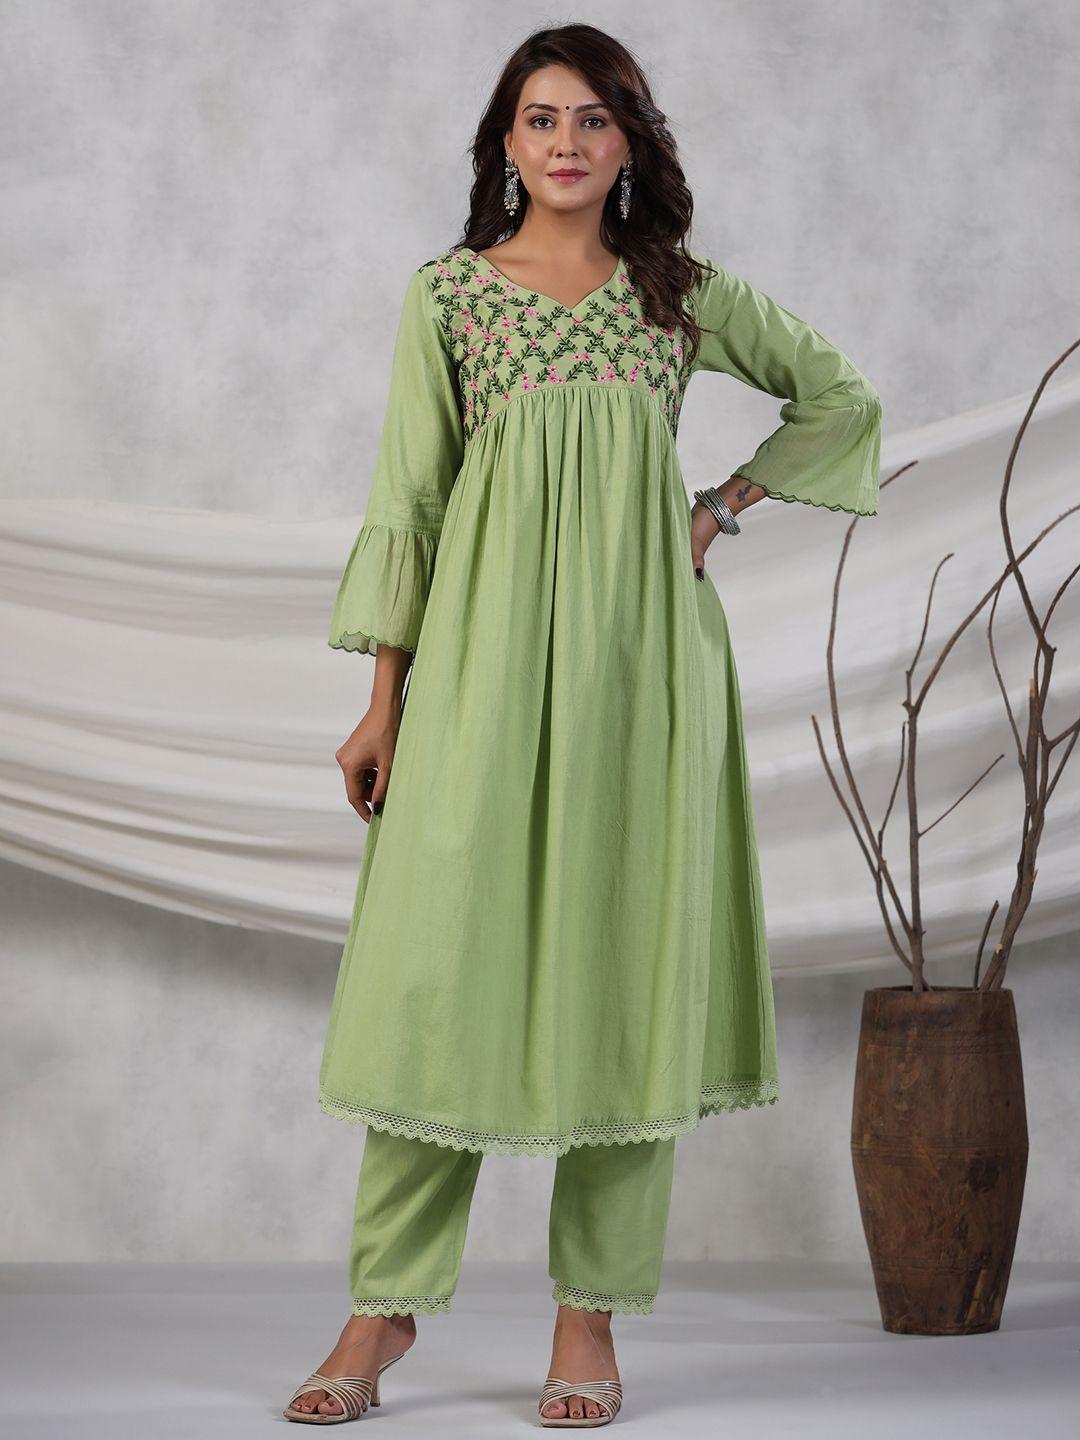 rangeelo floral embroidered regular thread work pure cotton kurta with trousers